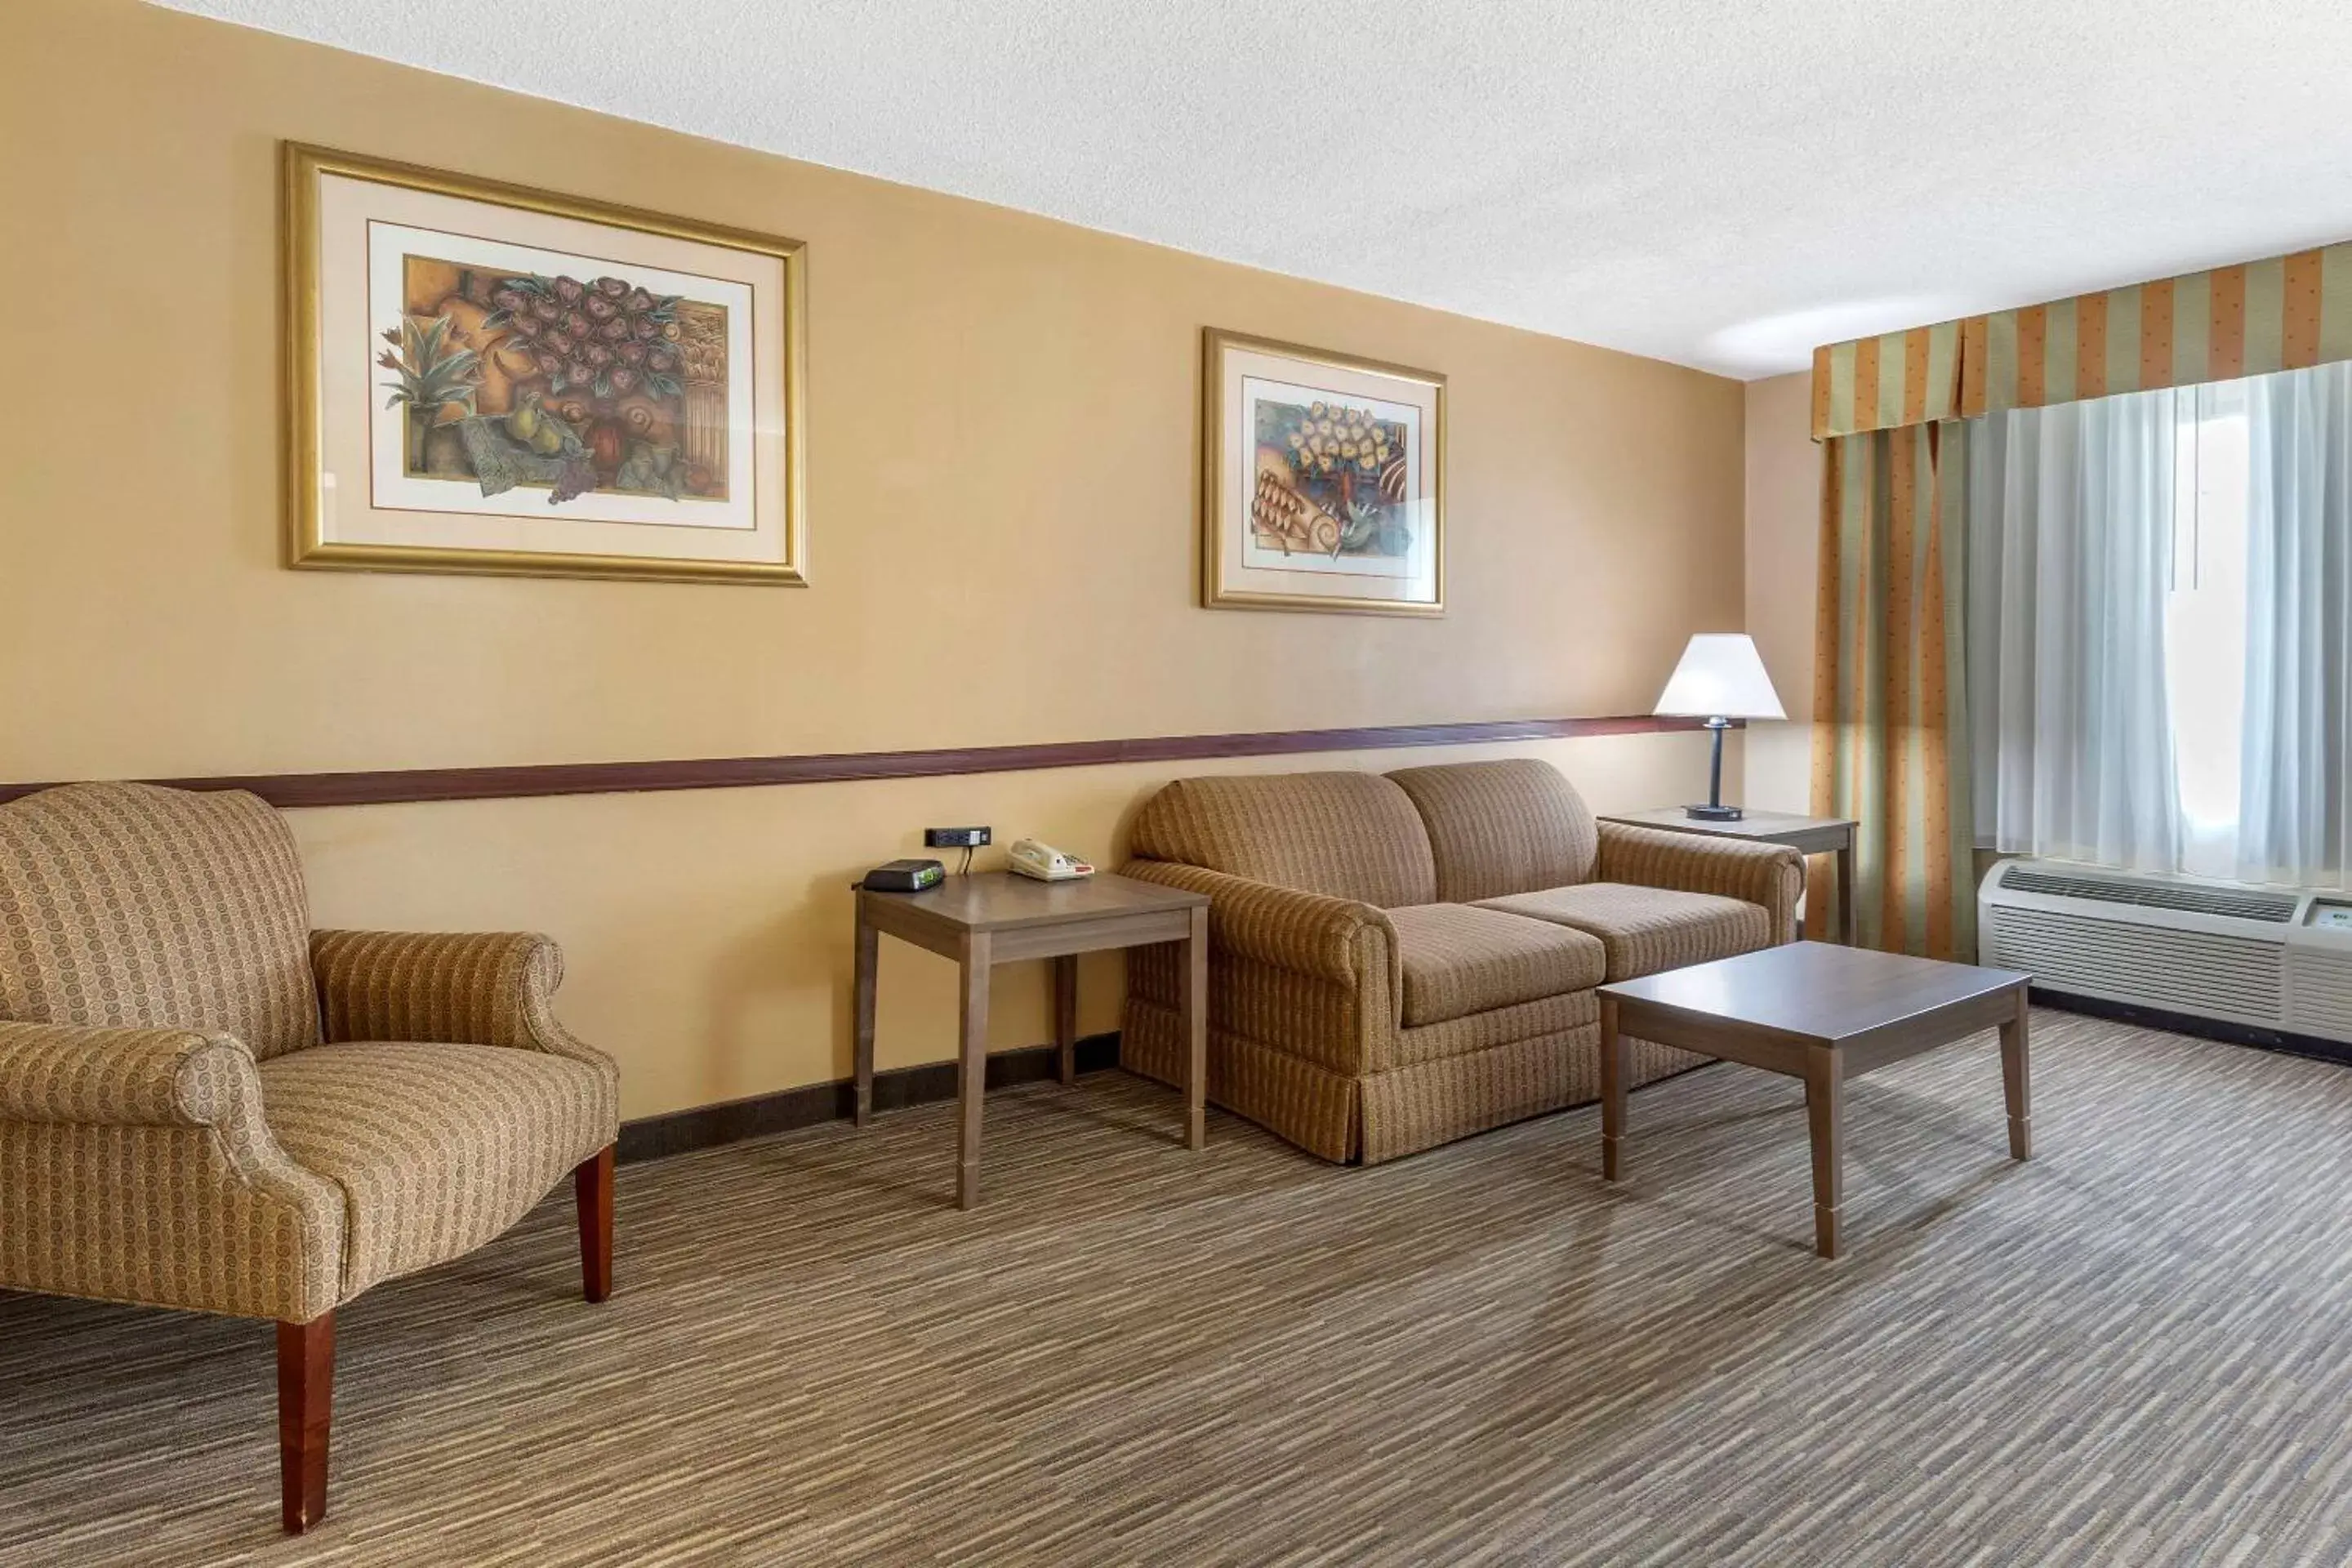 Bedroom, Lounge/Bar in Quality Inn & Suites Hanes Mall